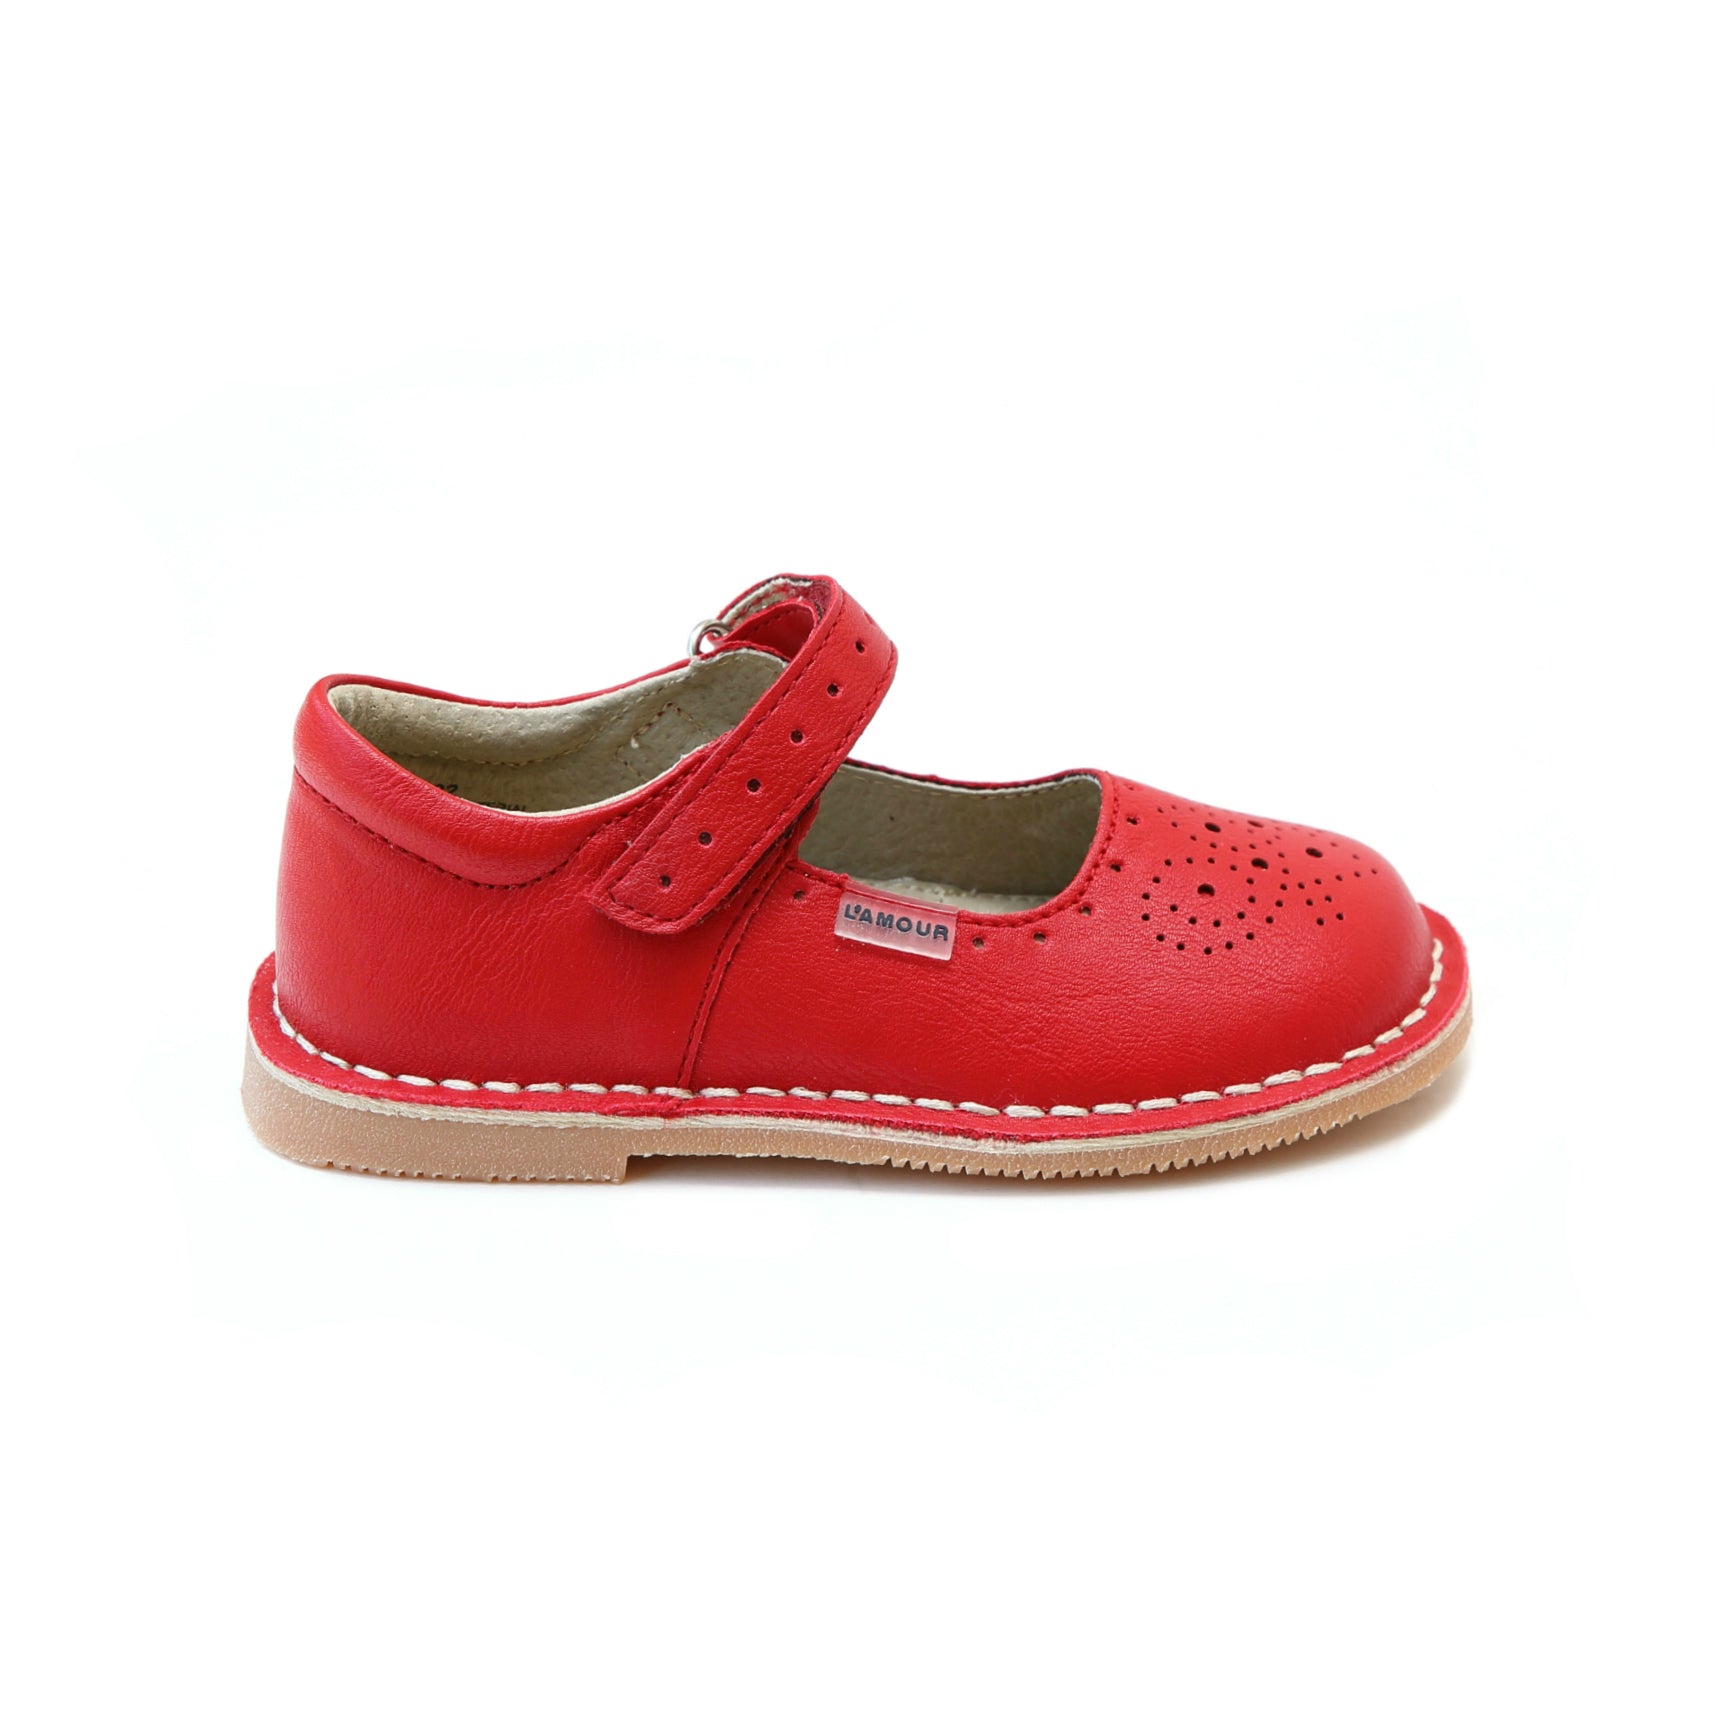 L'Amour Ollie Leather Mary Jane Mary Janes